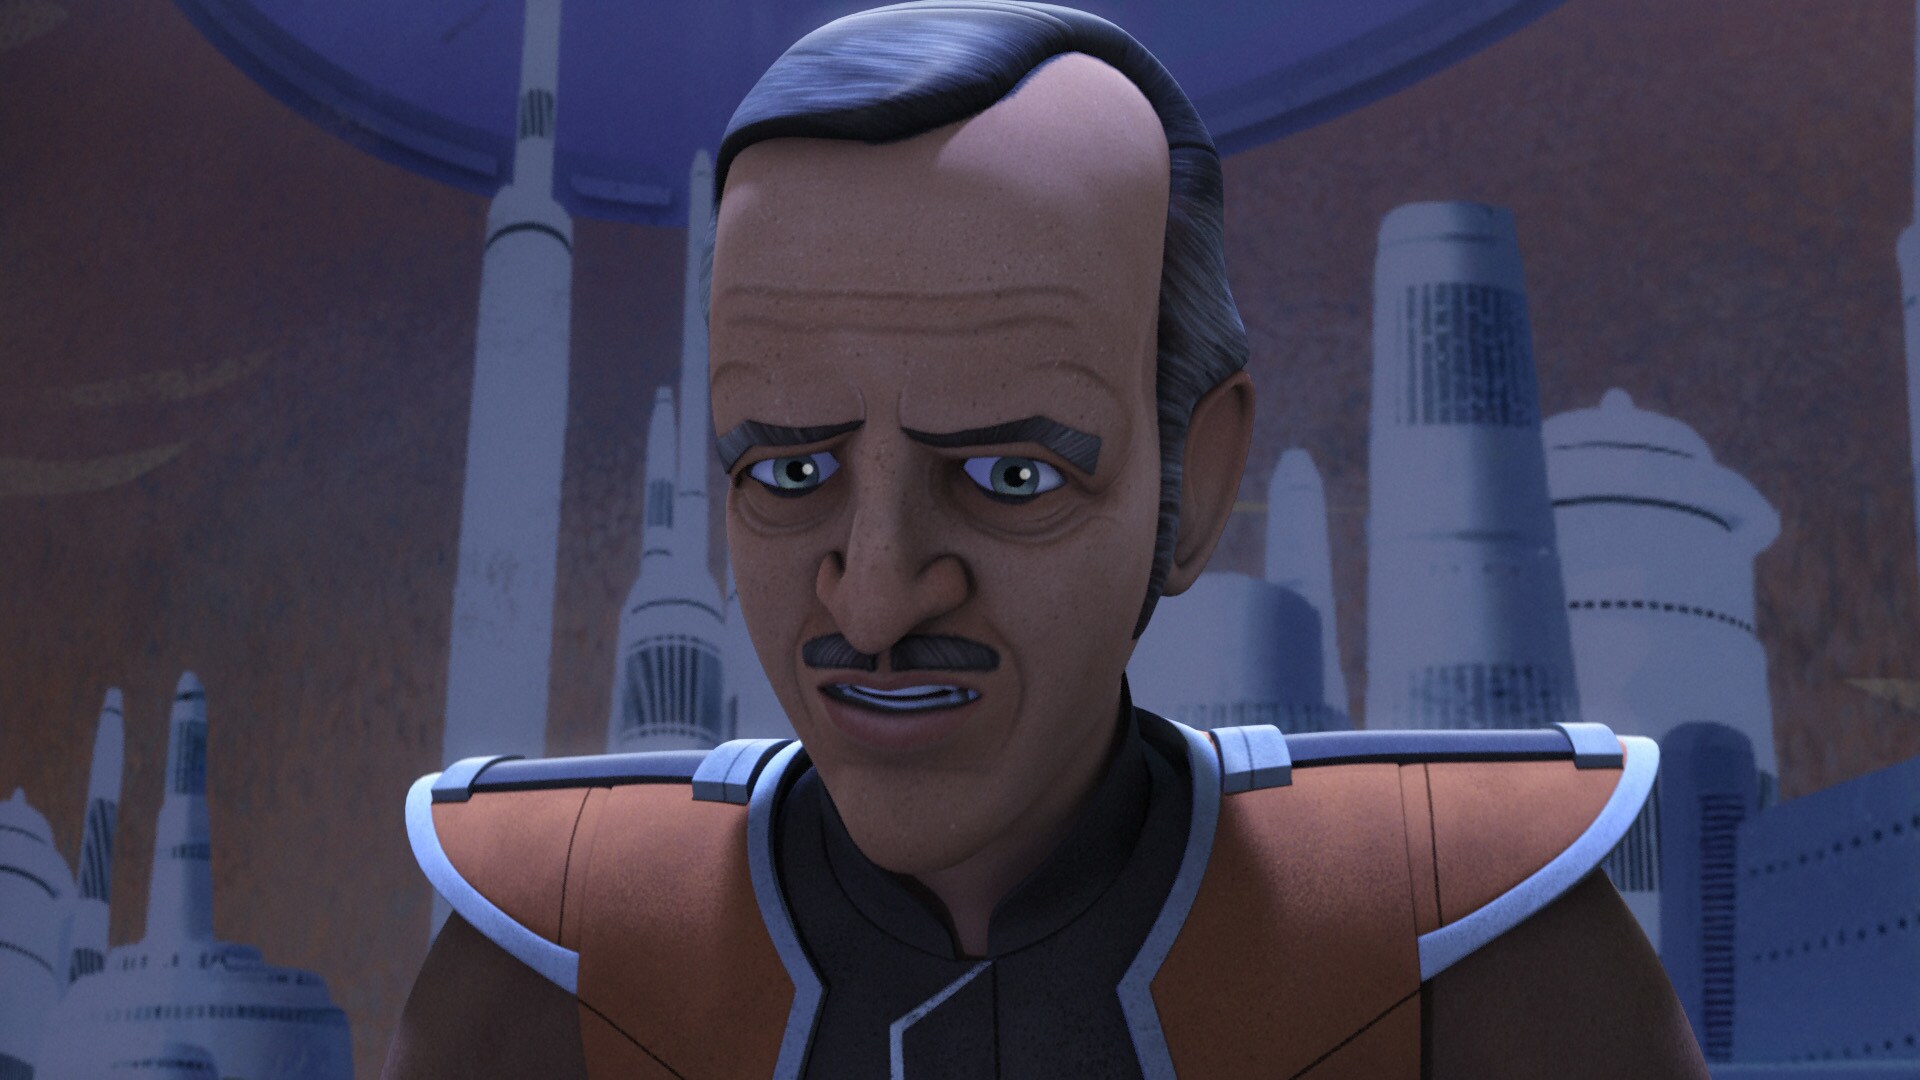 This episode marks the return of Gall Trayvis, voiced by actor Brent Spiner.